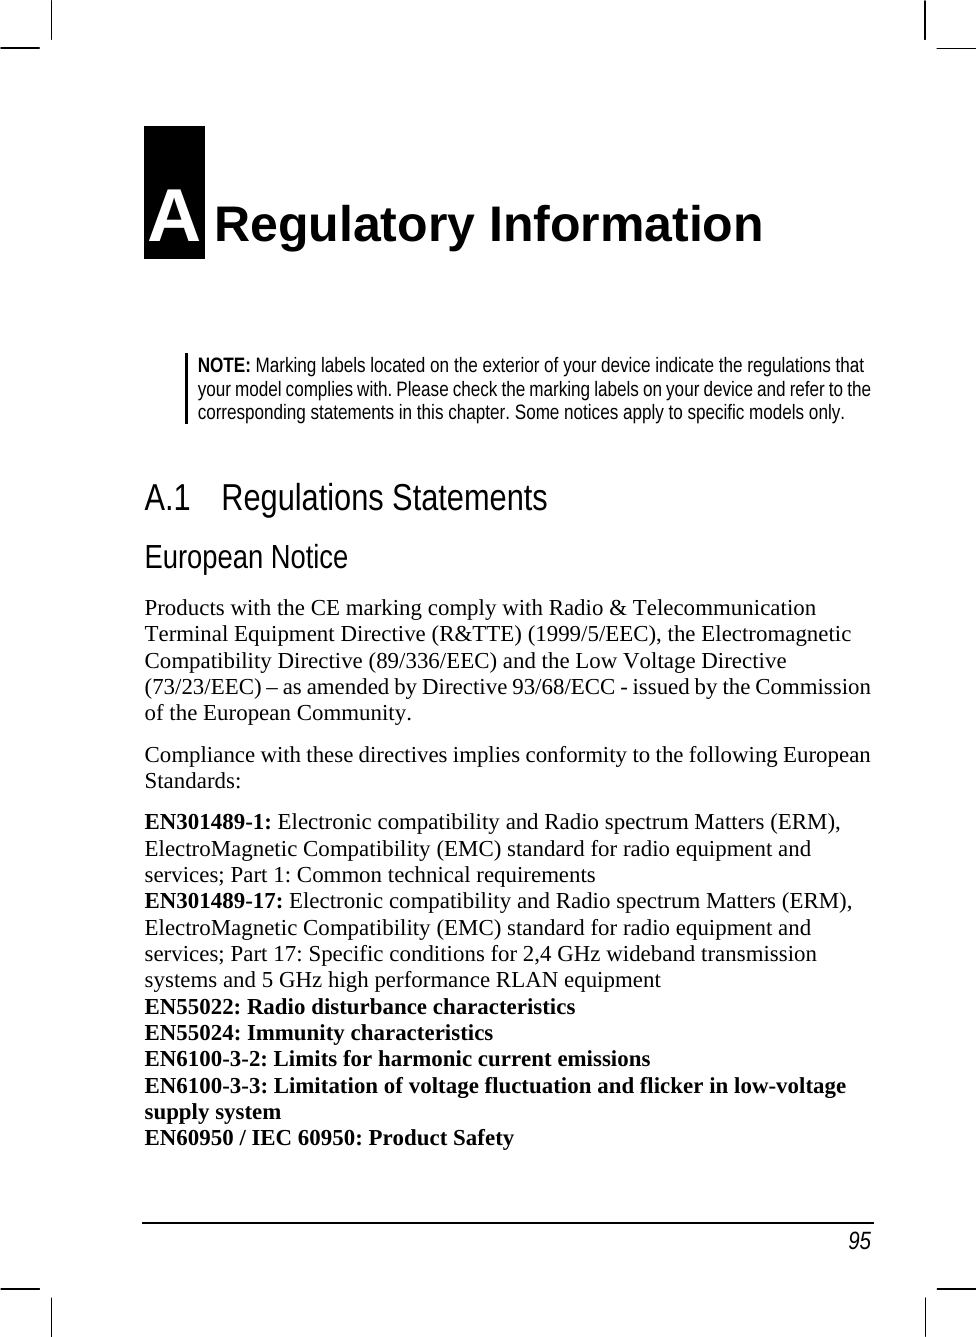   95 A Regulatory Information NOTE: Marking labels located on the exterior of your device indicate the regulations that your model complies with. Please check the marking labels on your device and refer to the corresponding statements in this chapter. Some notices apply to specific models only.   A.1 Regulations Statements European Notice Products with the CE marking comply with Radio &amp; Telecommunication Terminal Equipment Directive (R&amp;TTE) (1999/5/EEC), the Electromagnetic Compatibility Directive (89/336/EEC) and the Low Voltage Directive (73/23/EEC) – as amended by Directive 93/68/ECC - issued by the Commission of the European Community. Compliance with these directives implies conformity to the following European Standards: EN301489-1: Electronic compatibility and Radio spectrum Matters (ERM), ElectroMagnetic Compatibility (EMC) standard for radio equipment and services; Part 1: Common technical requirements EN301489-17: Electronic compatibility and Radio spectrum Matters (ERM), ElectroMagnetic Compatibility (EMC) standard for radio equipment and services; Part 17: Specific conditions for 2,4 GHz wideband transmission systems and 5 GHz high performance RLAN equipment EN55022: Radio disturbance characteristics EN55024: Immunity characteristics EN6100-3-2: Limits for harmonic current emissions EN6100-3-3: Limitation of voltage fluctuation and flicker in low-voltage supply system EN60950 / IEC 60950: Product Safety 